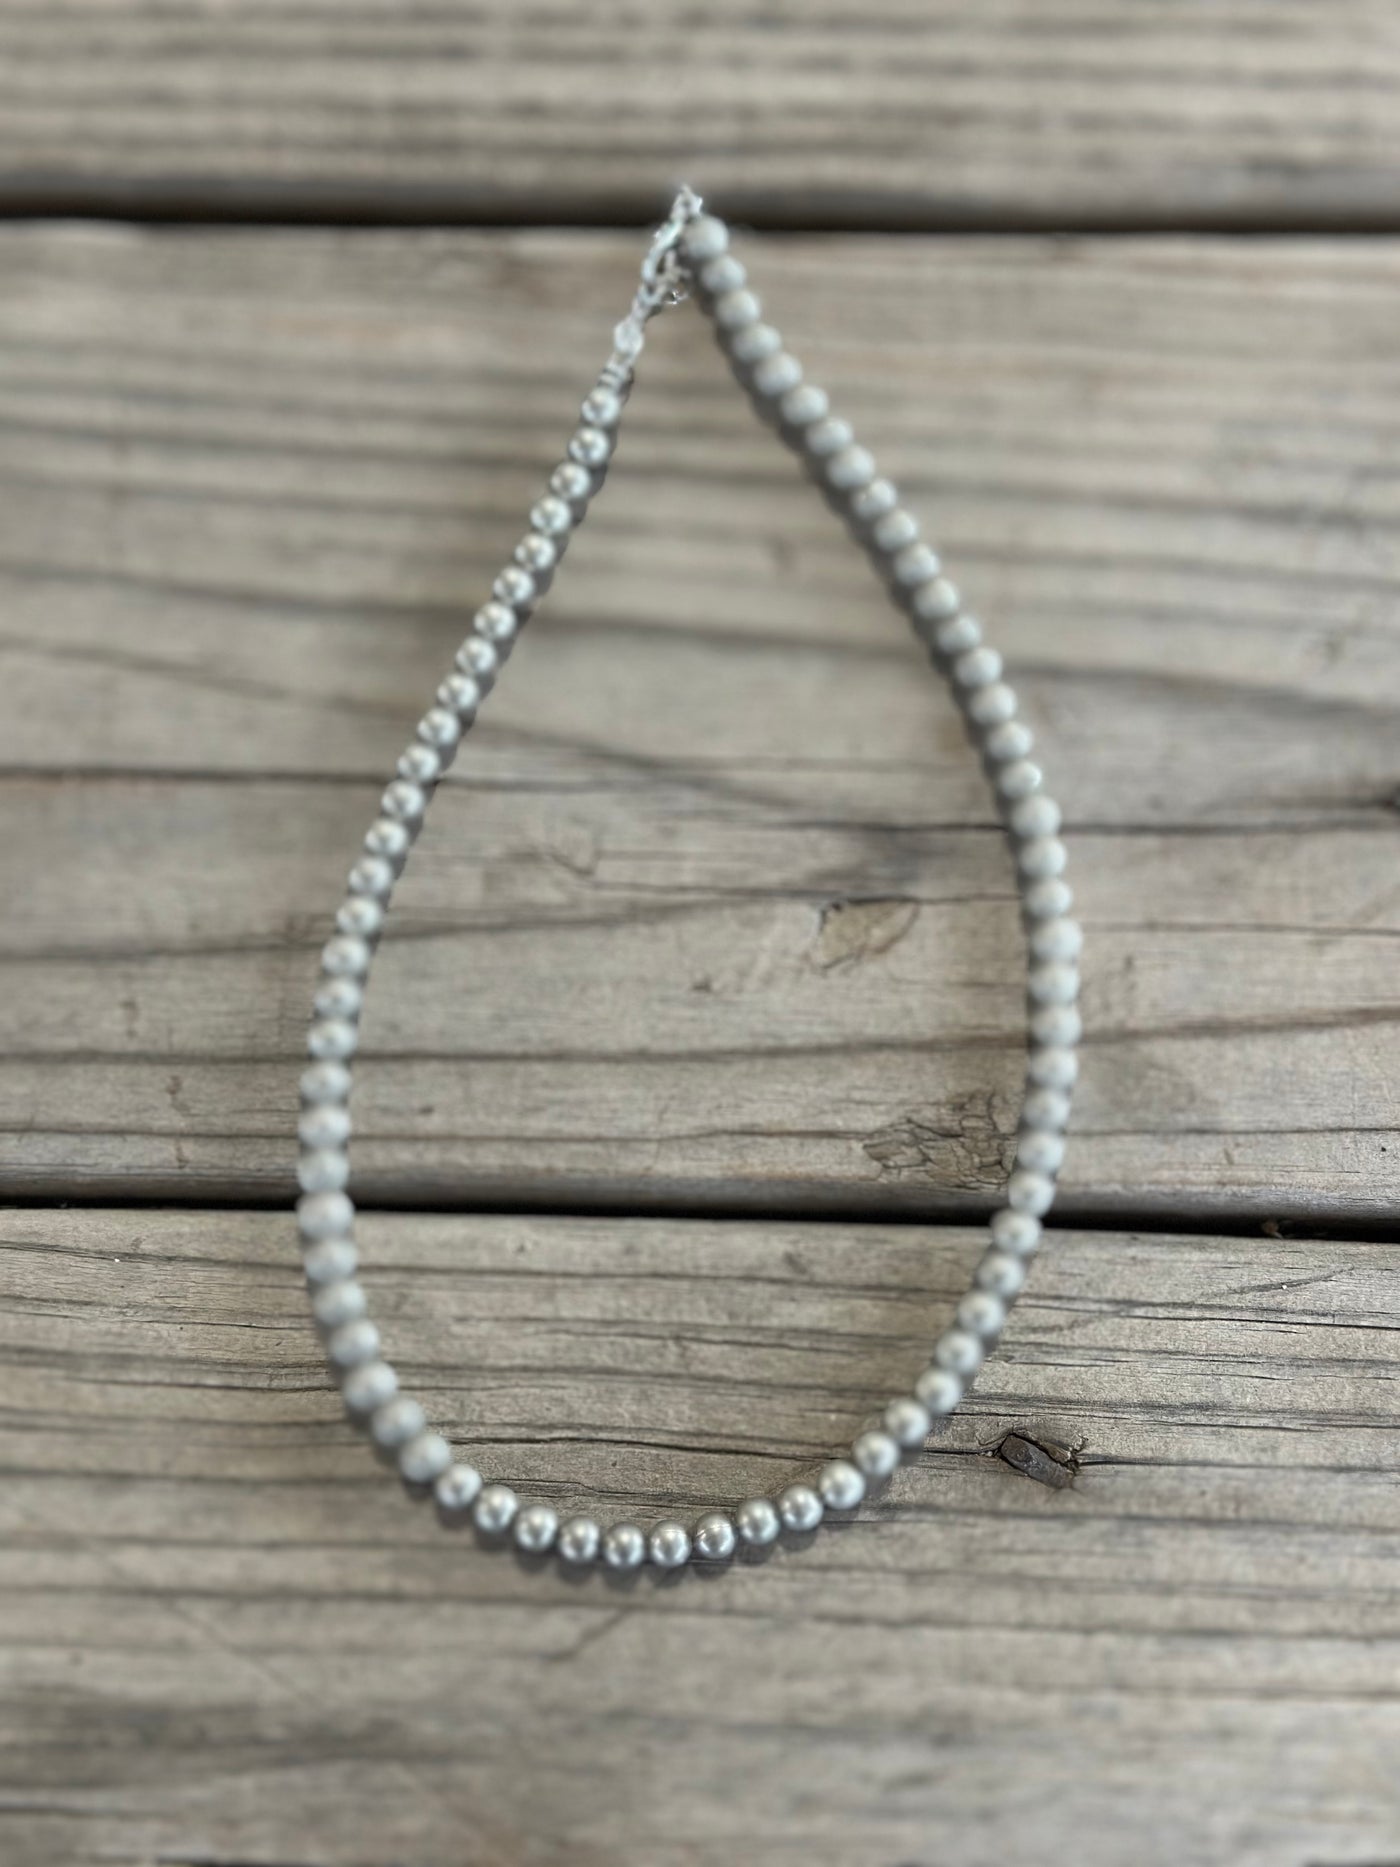 6mm Silver Bead Necklace